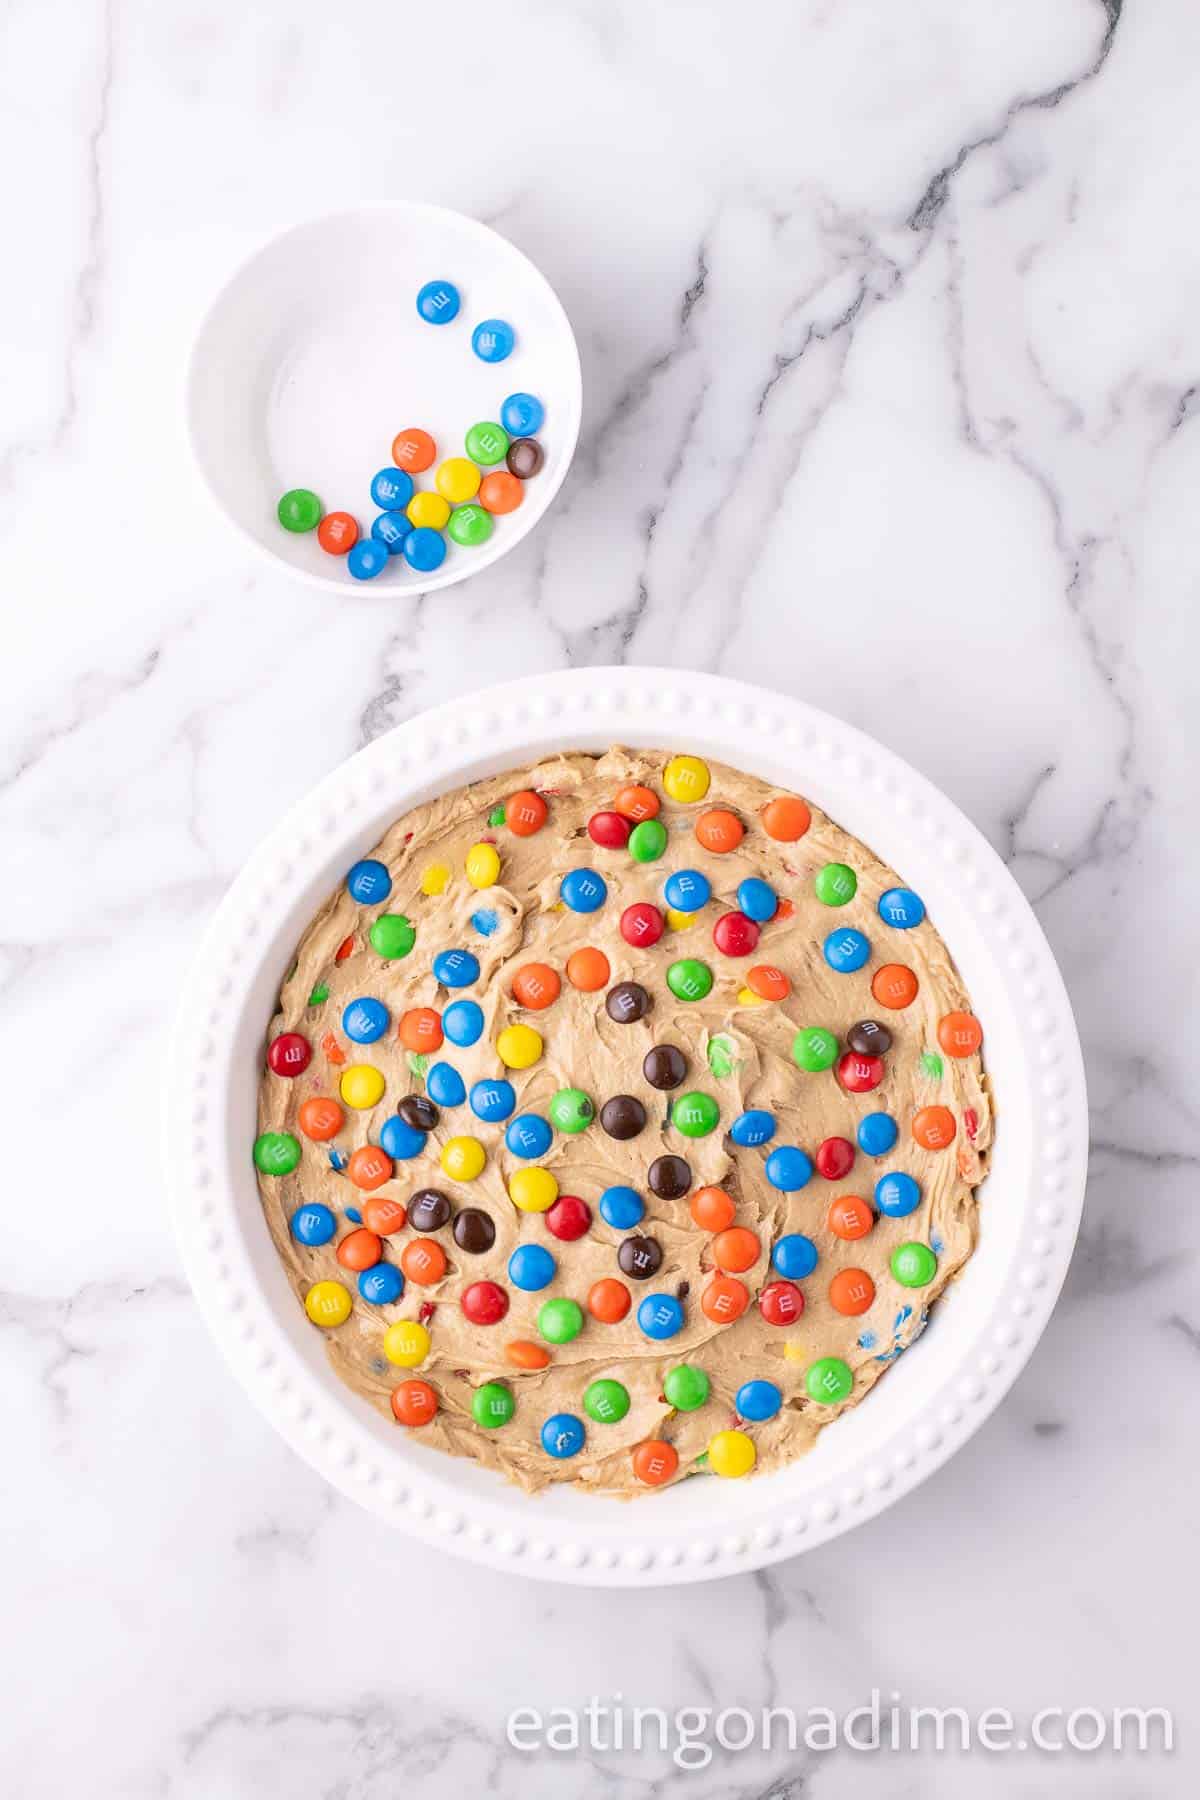 Pressing the cookie batter into the prepared pan and topped with M&M